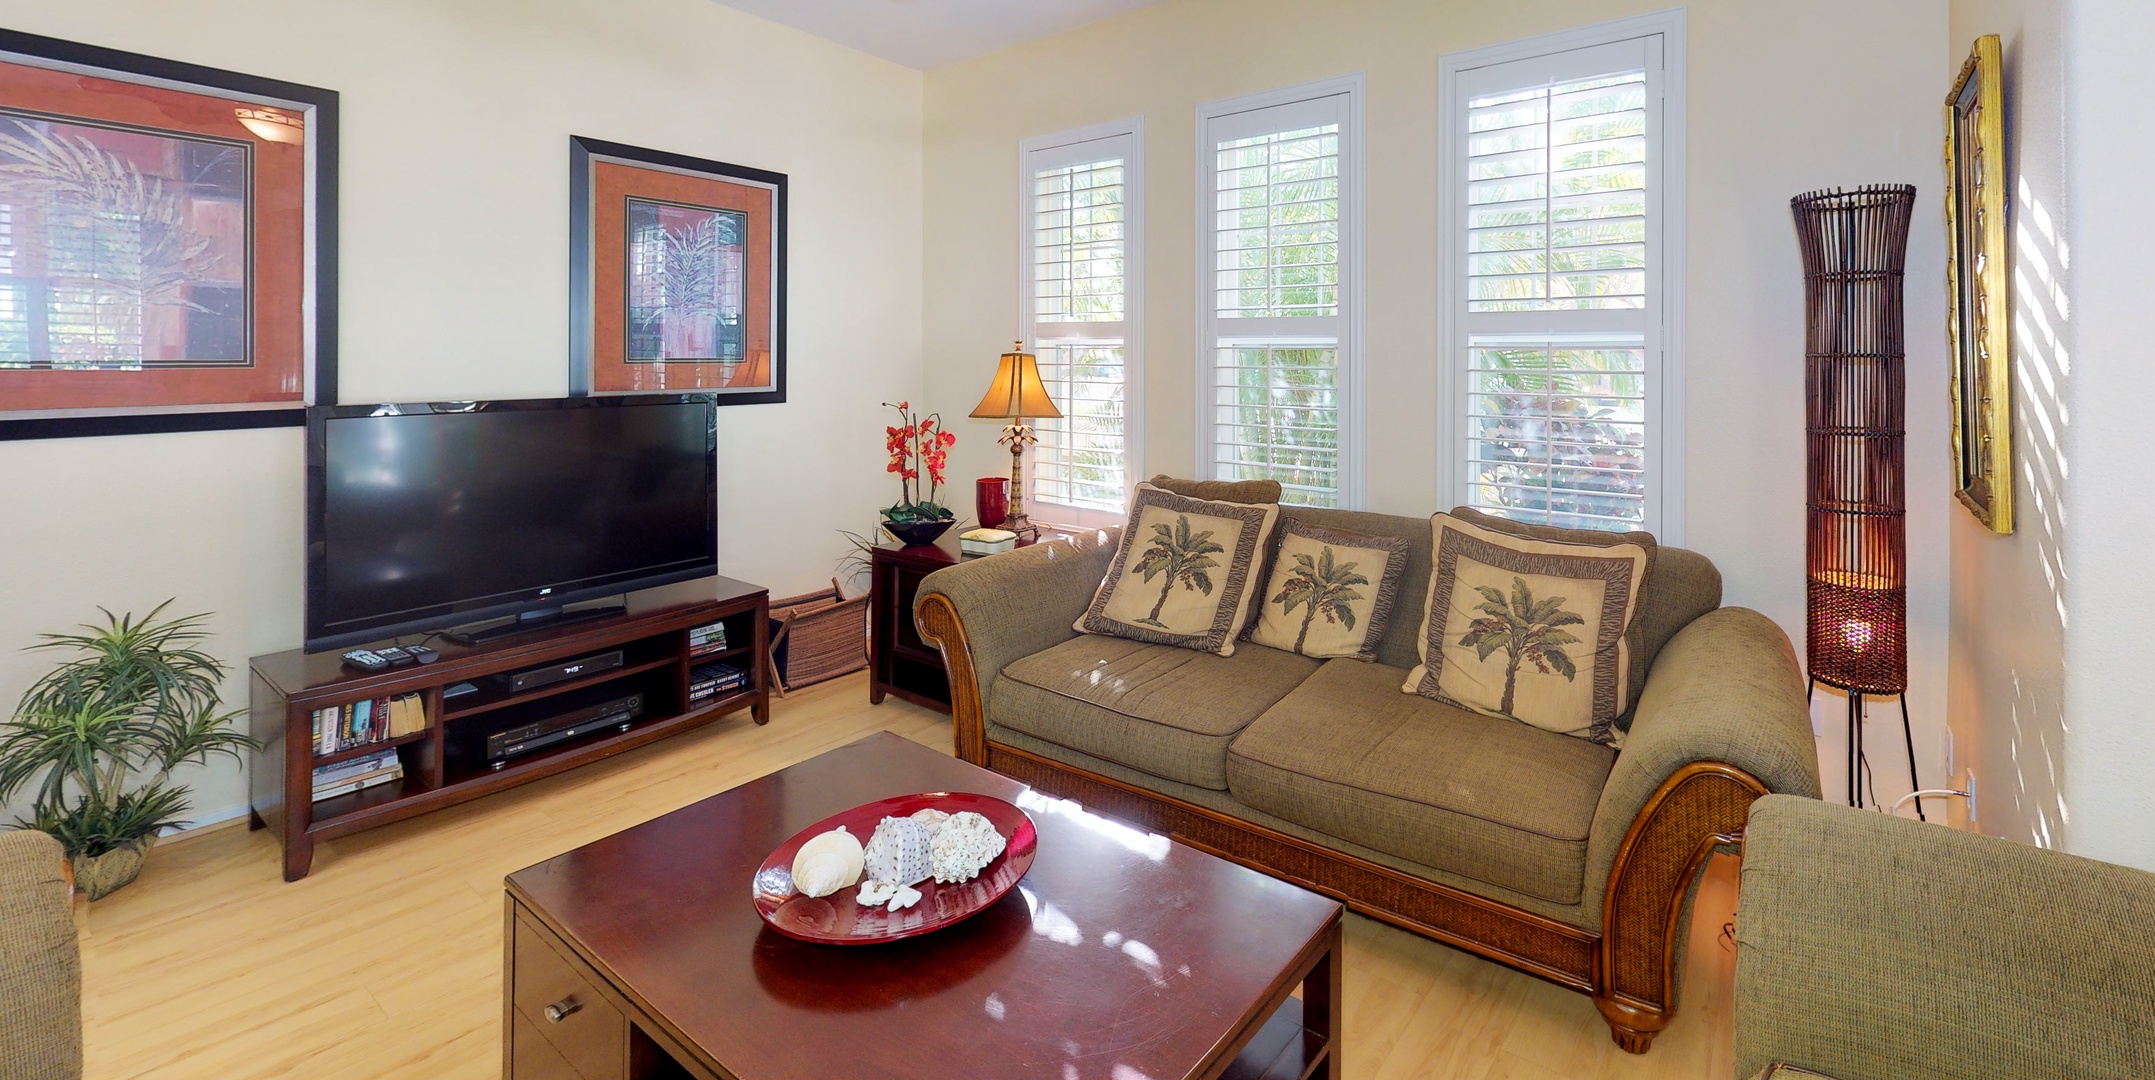 Kapolei Vacation Rentals, Coconut Plantation 1078-3 - Sink into the plush seating in the living area surrounded by natural wood tones and TV.